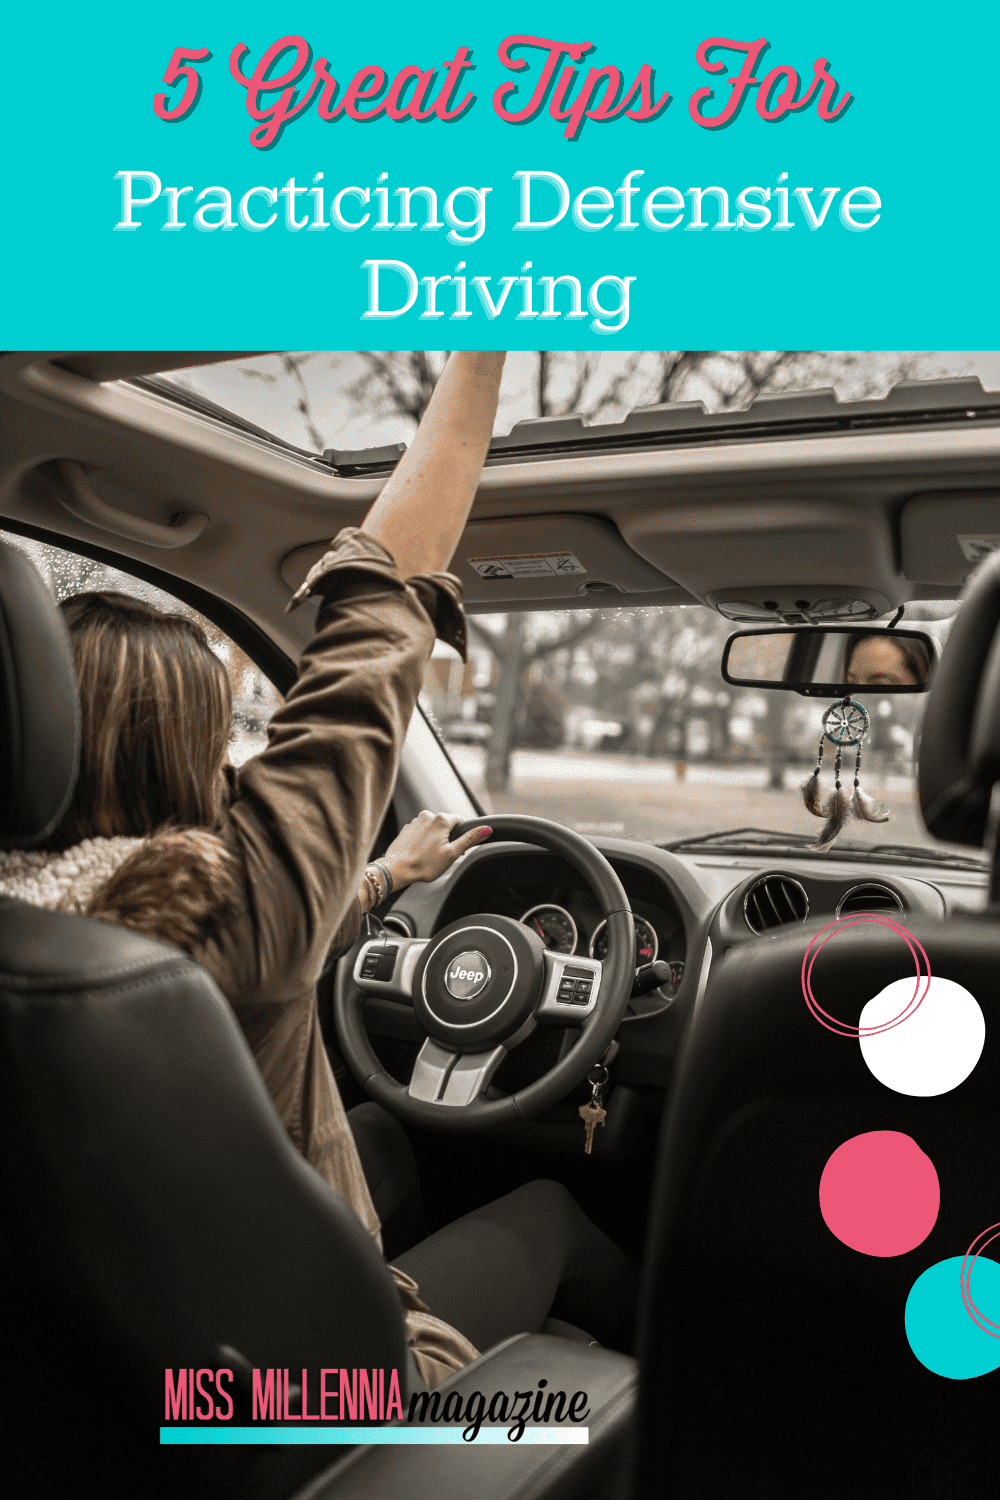 5 Great Tips For Practicing Defensive Driving